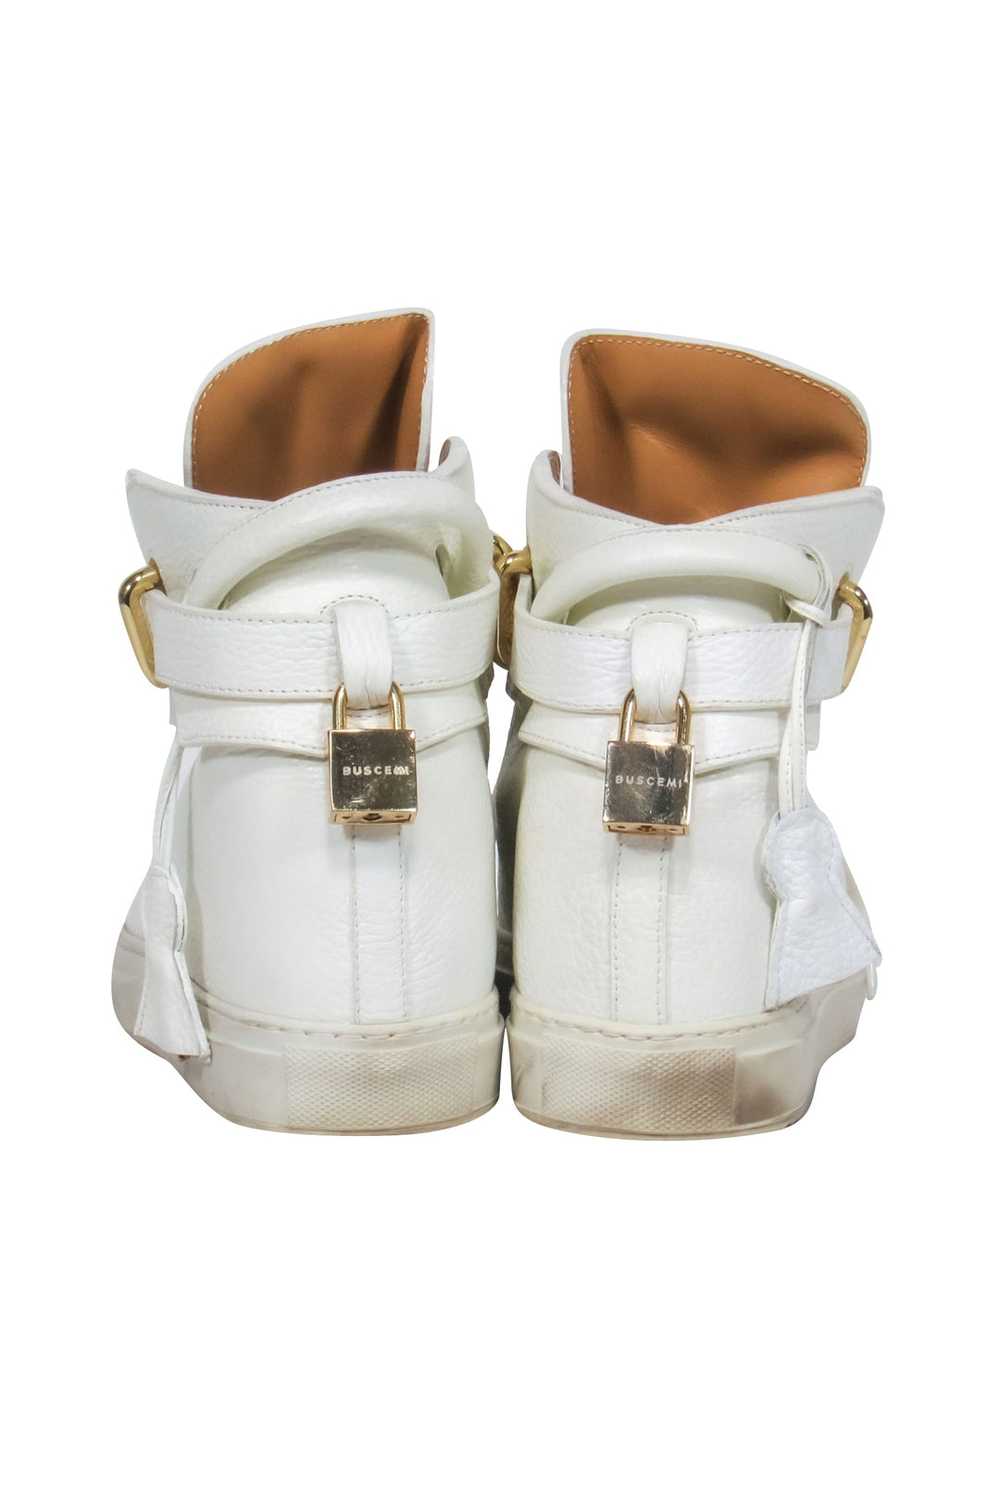 Buscemi - White 100MM Sneakers w/ Gold-Toned Hard… - image 4